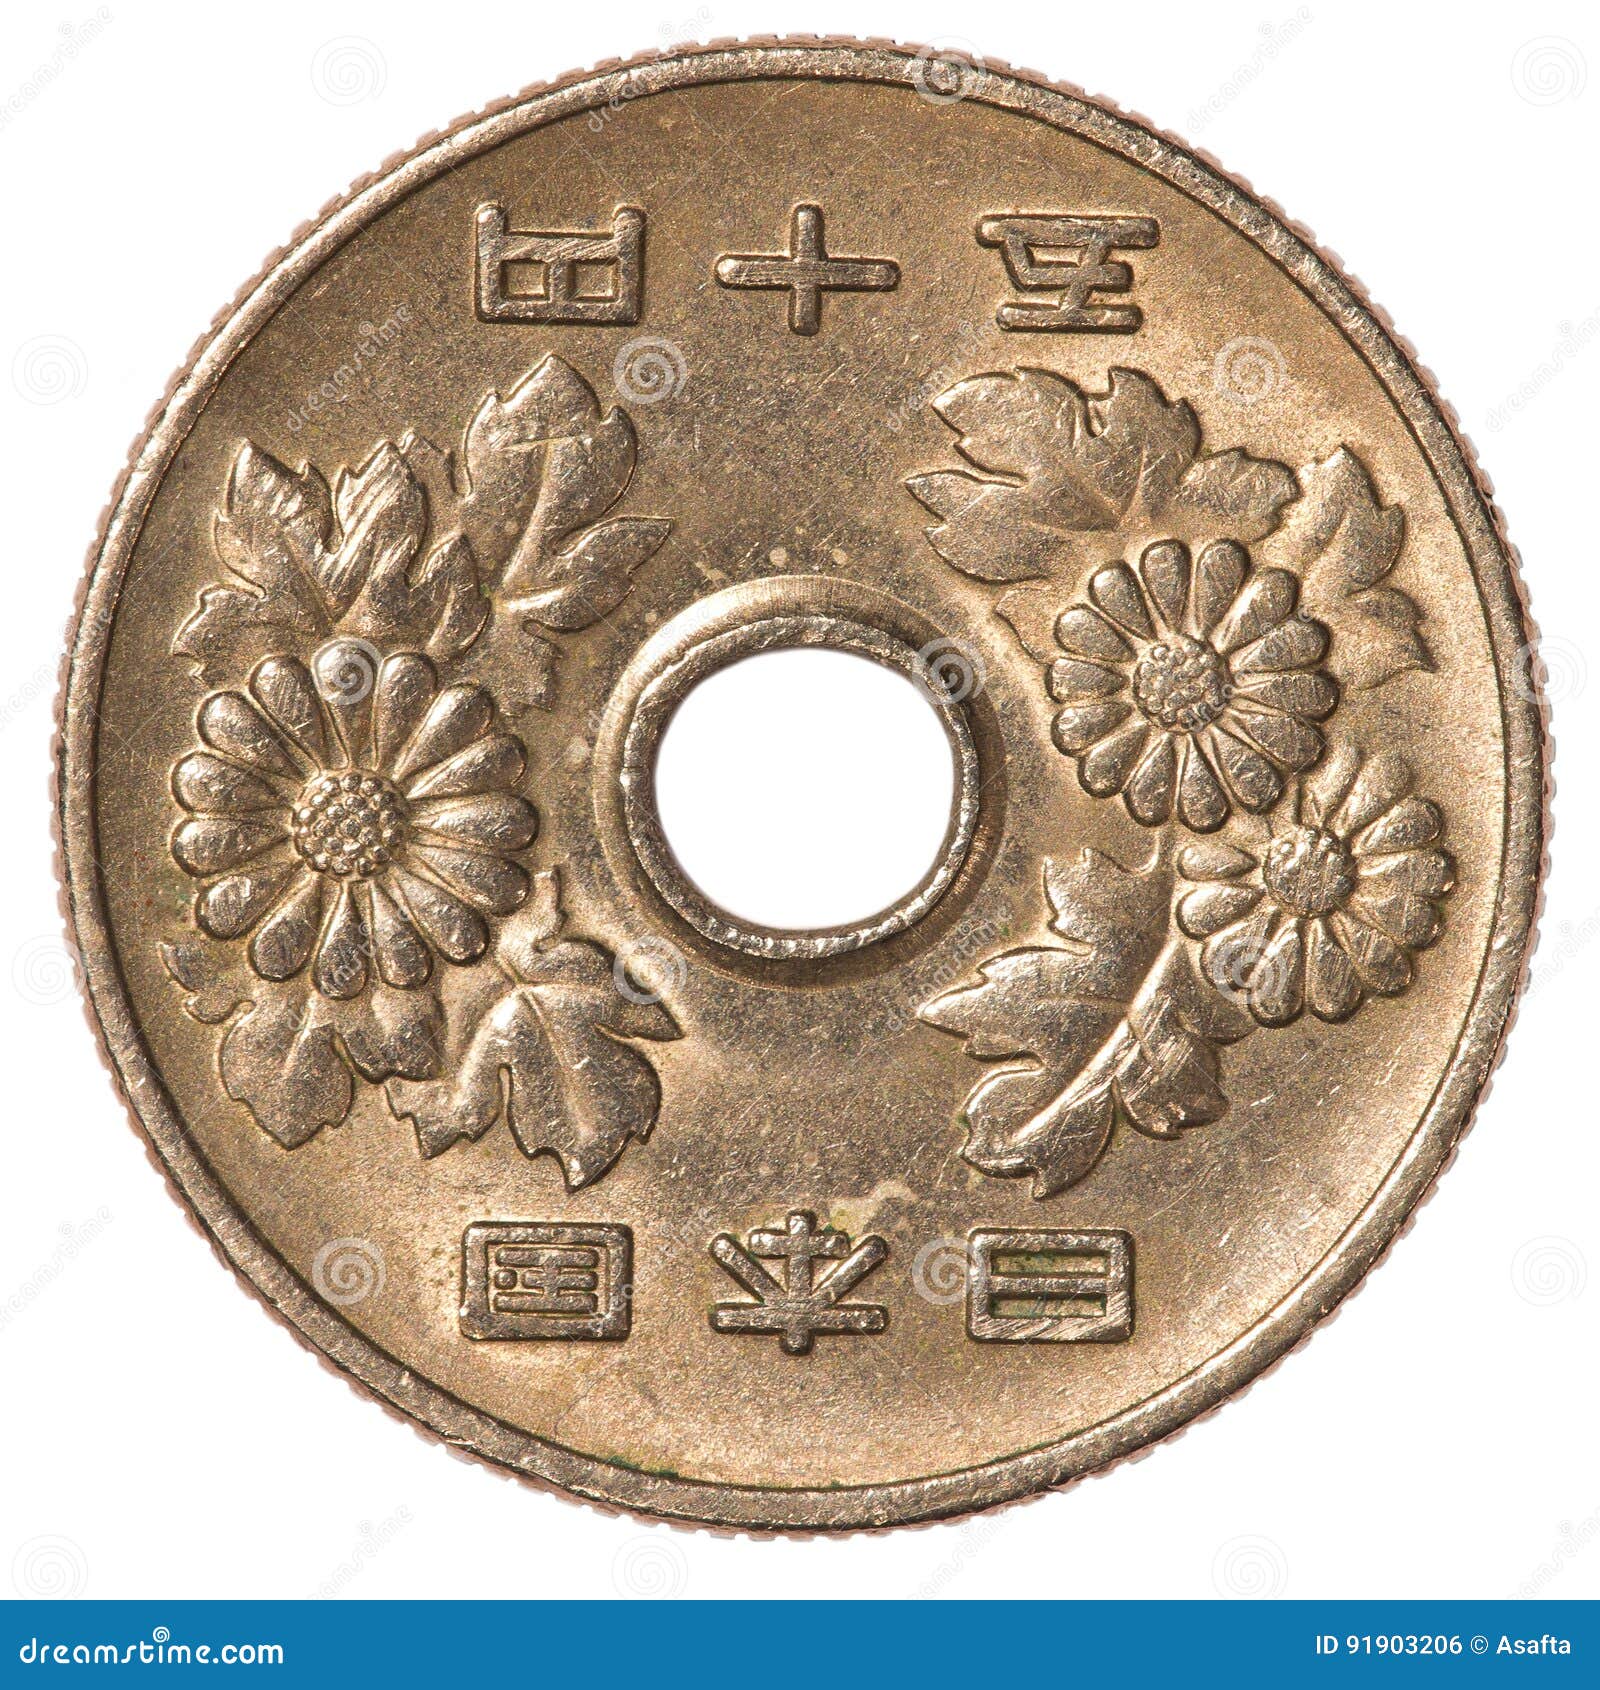 50 japanese yen coin isolated on white background.